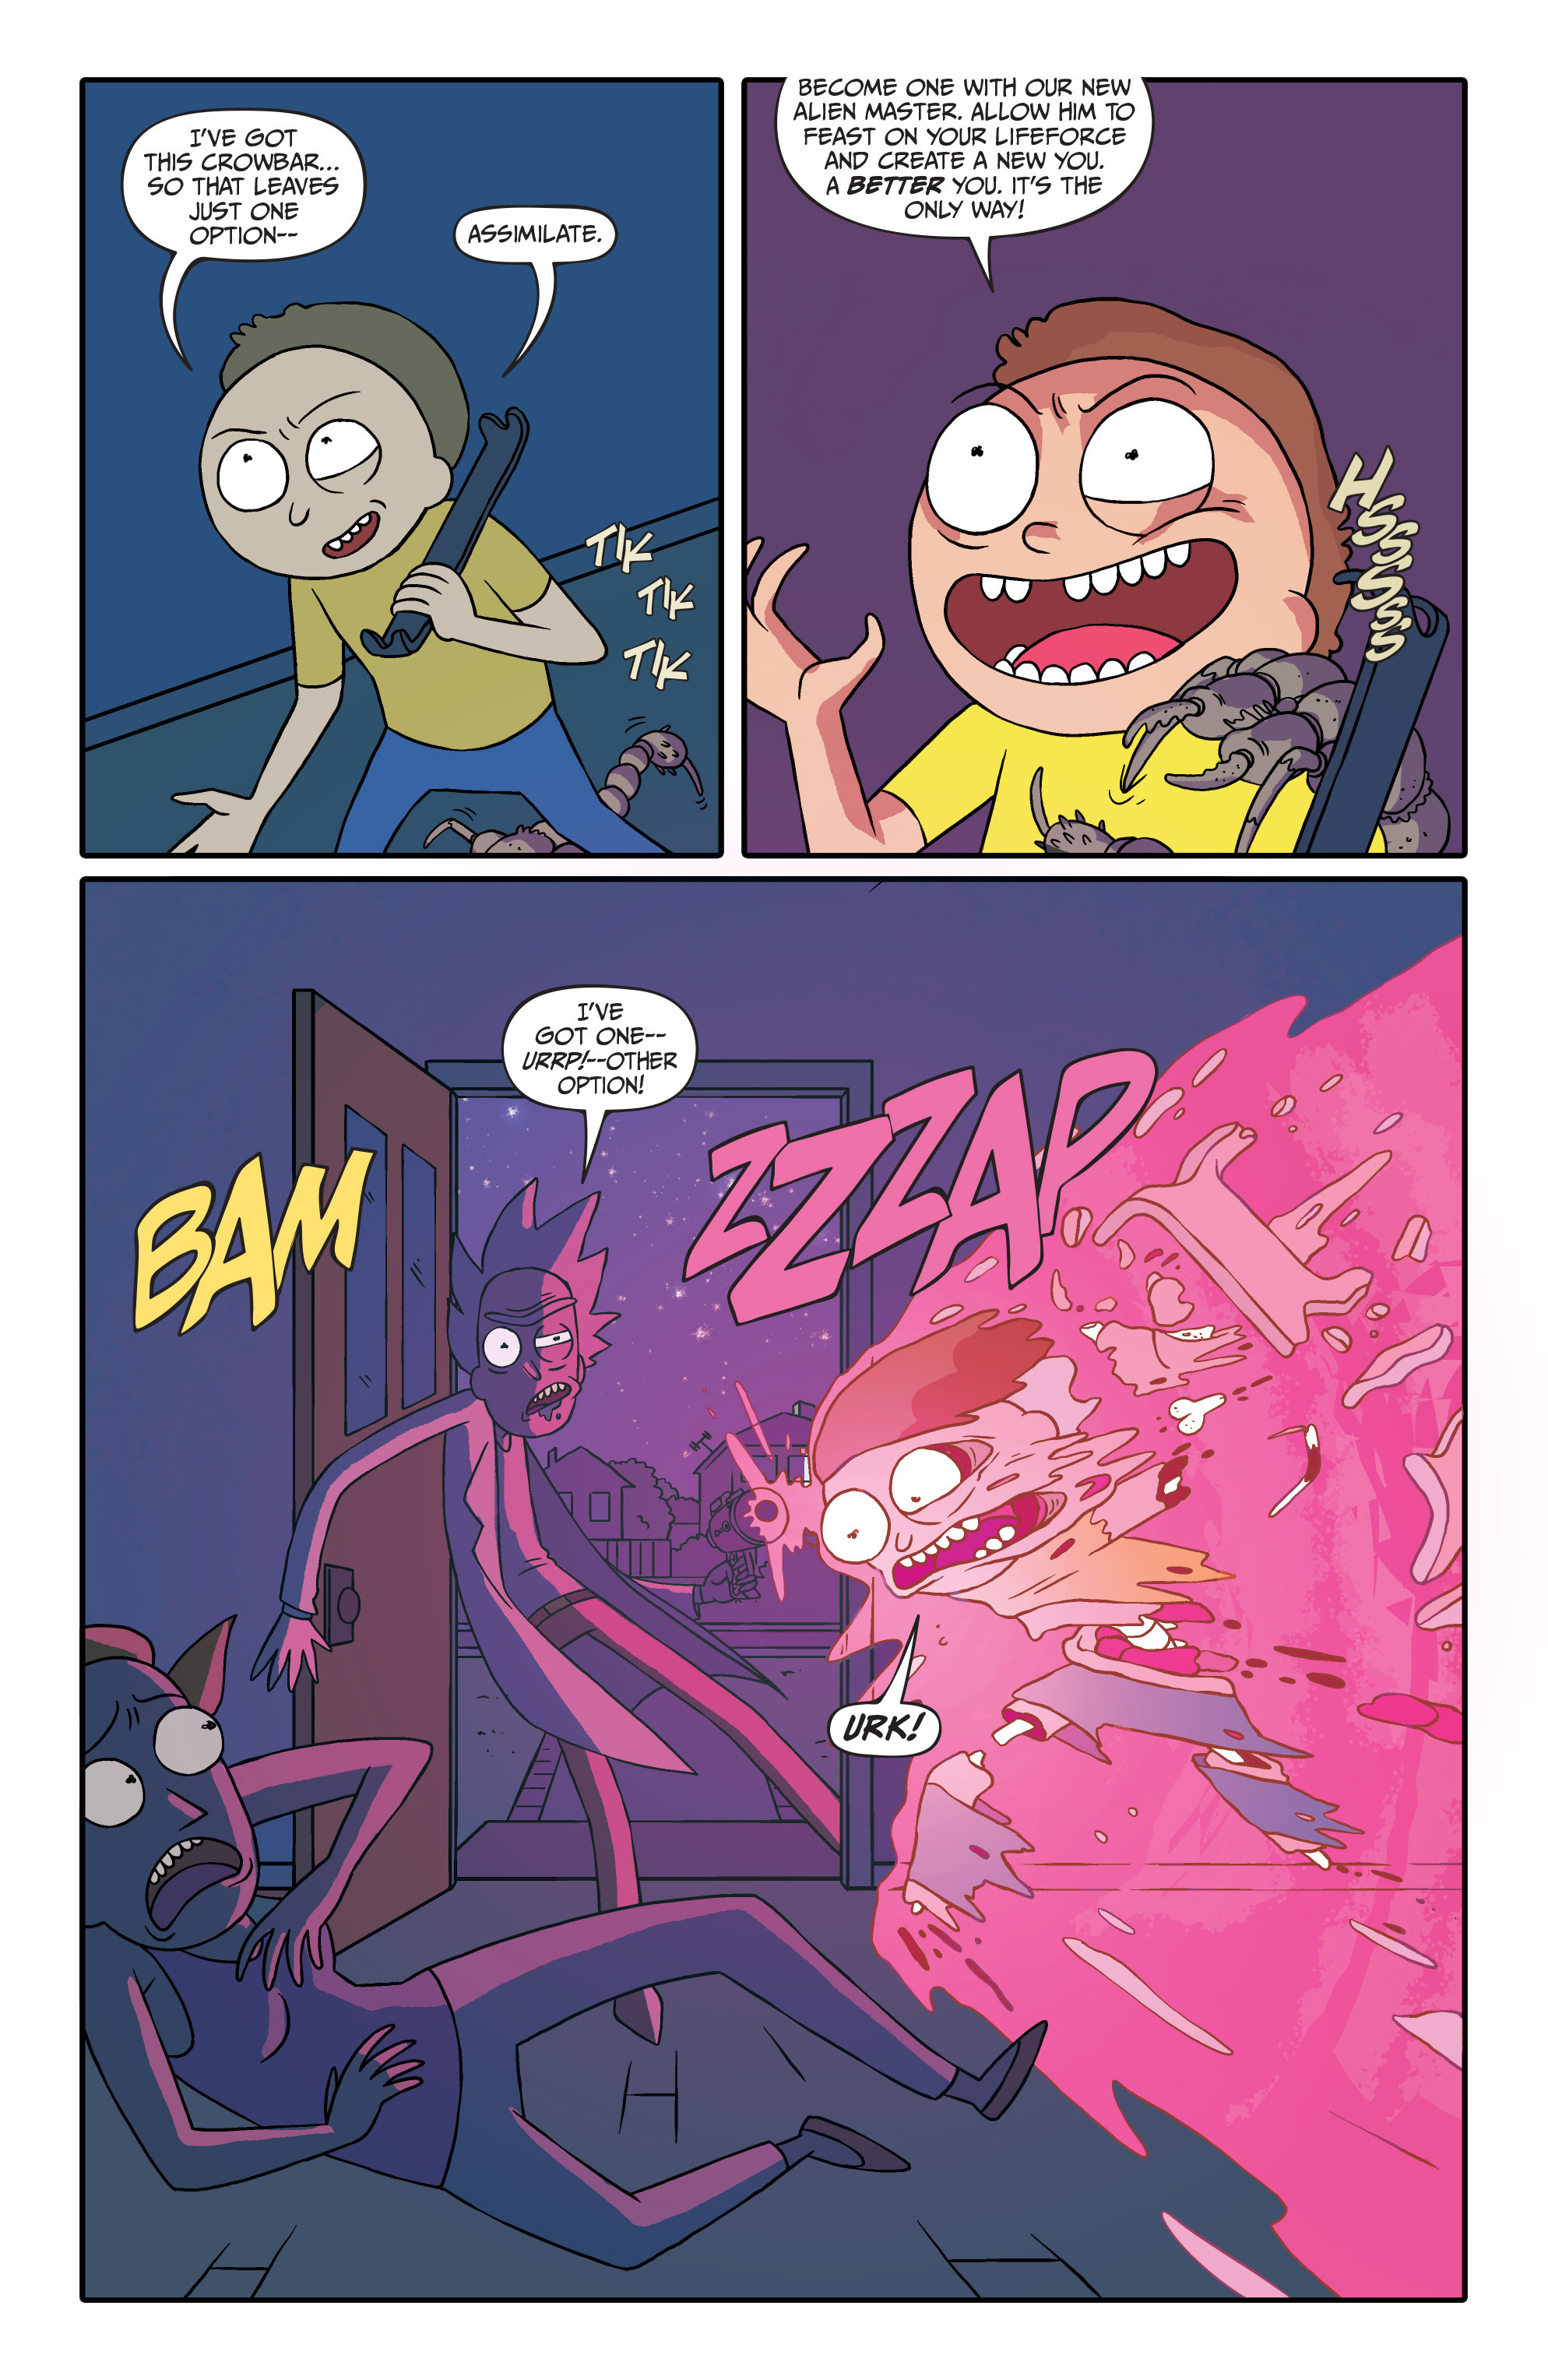 Rick And Morty Issue 3 Read Rick And Morty Issue 3 Comic Online In High Quality Read Full